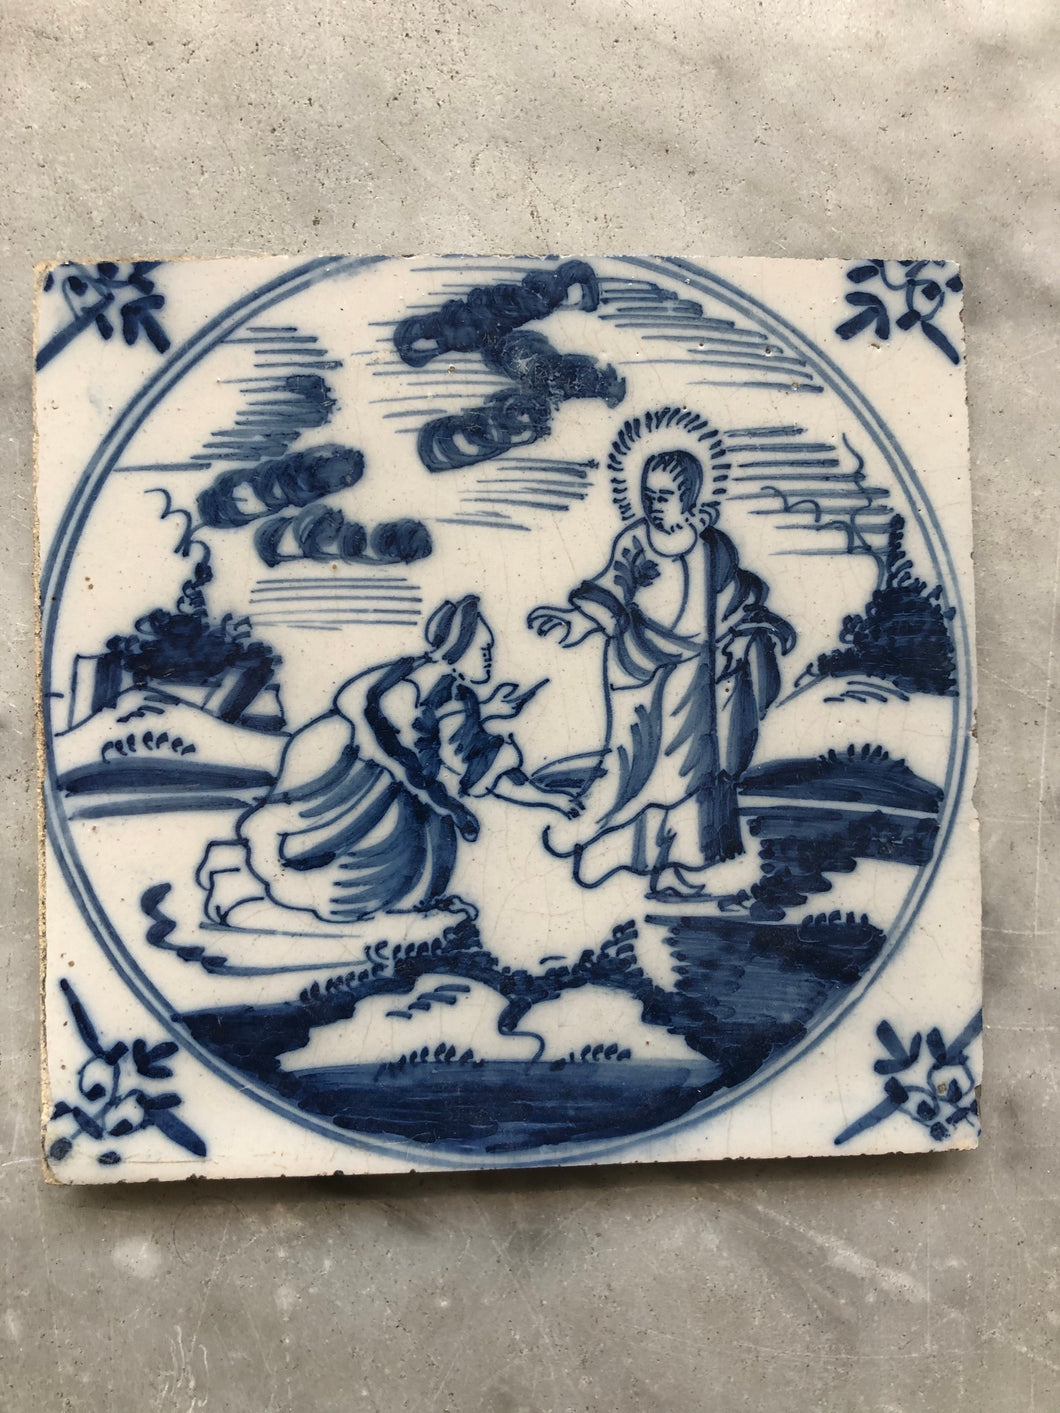 Nice 18 th century delft tile with jesus